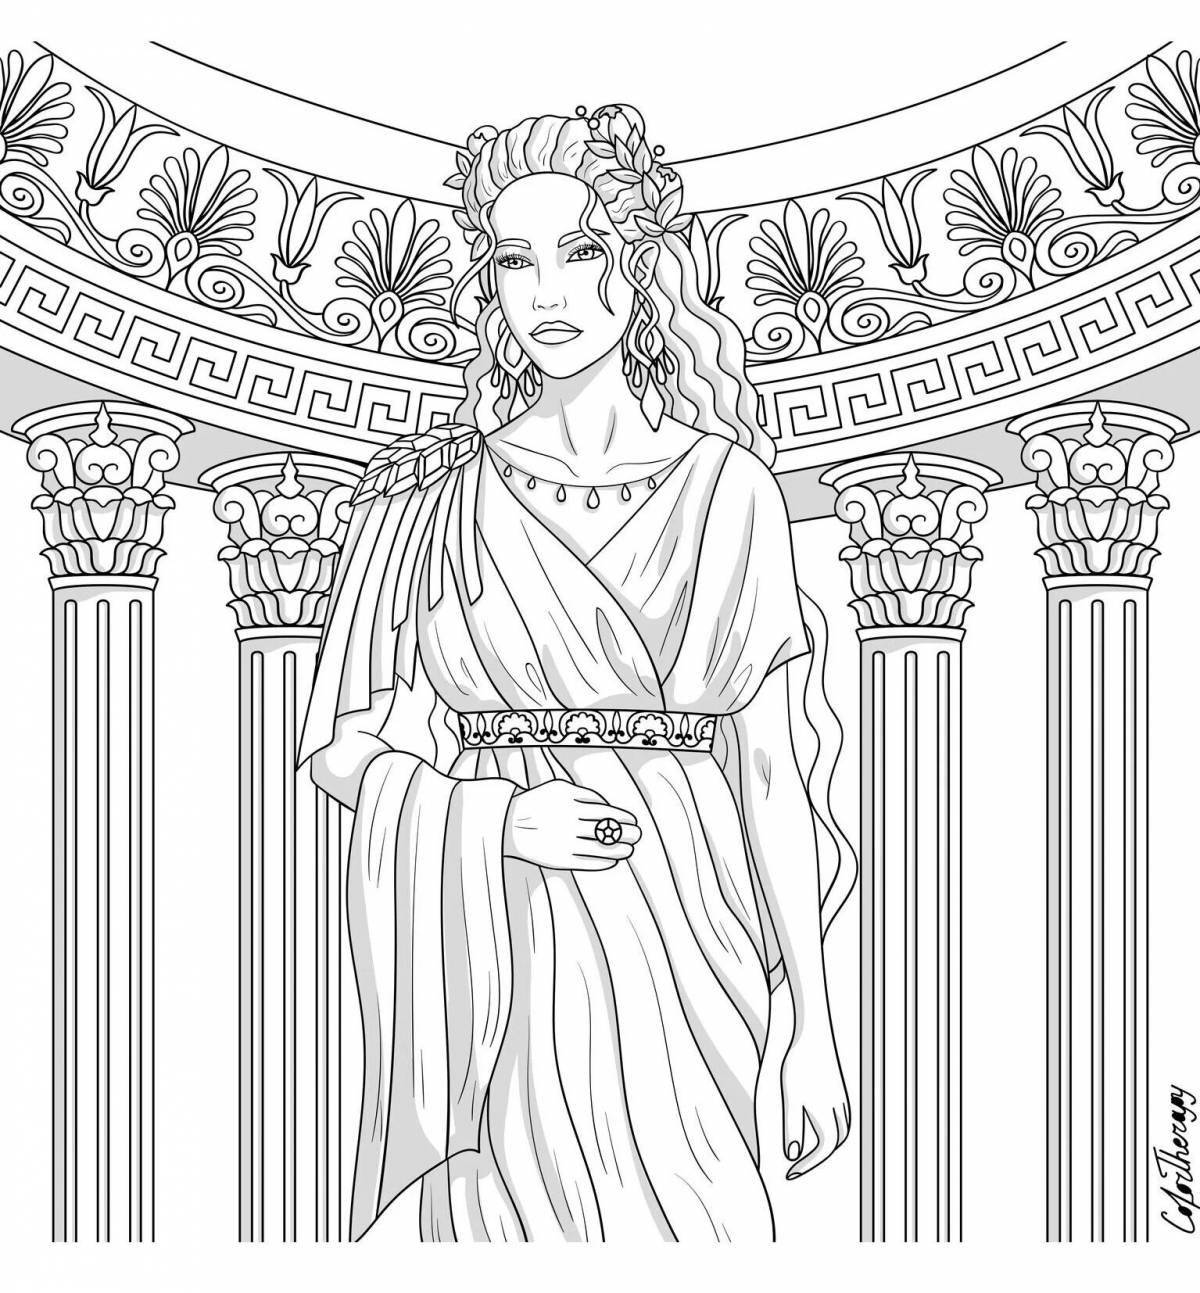 Awesome aphrodite goddess coloring page